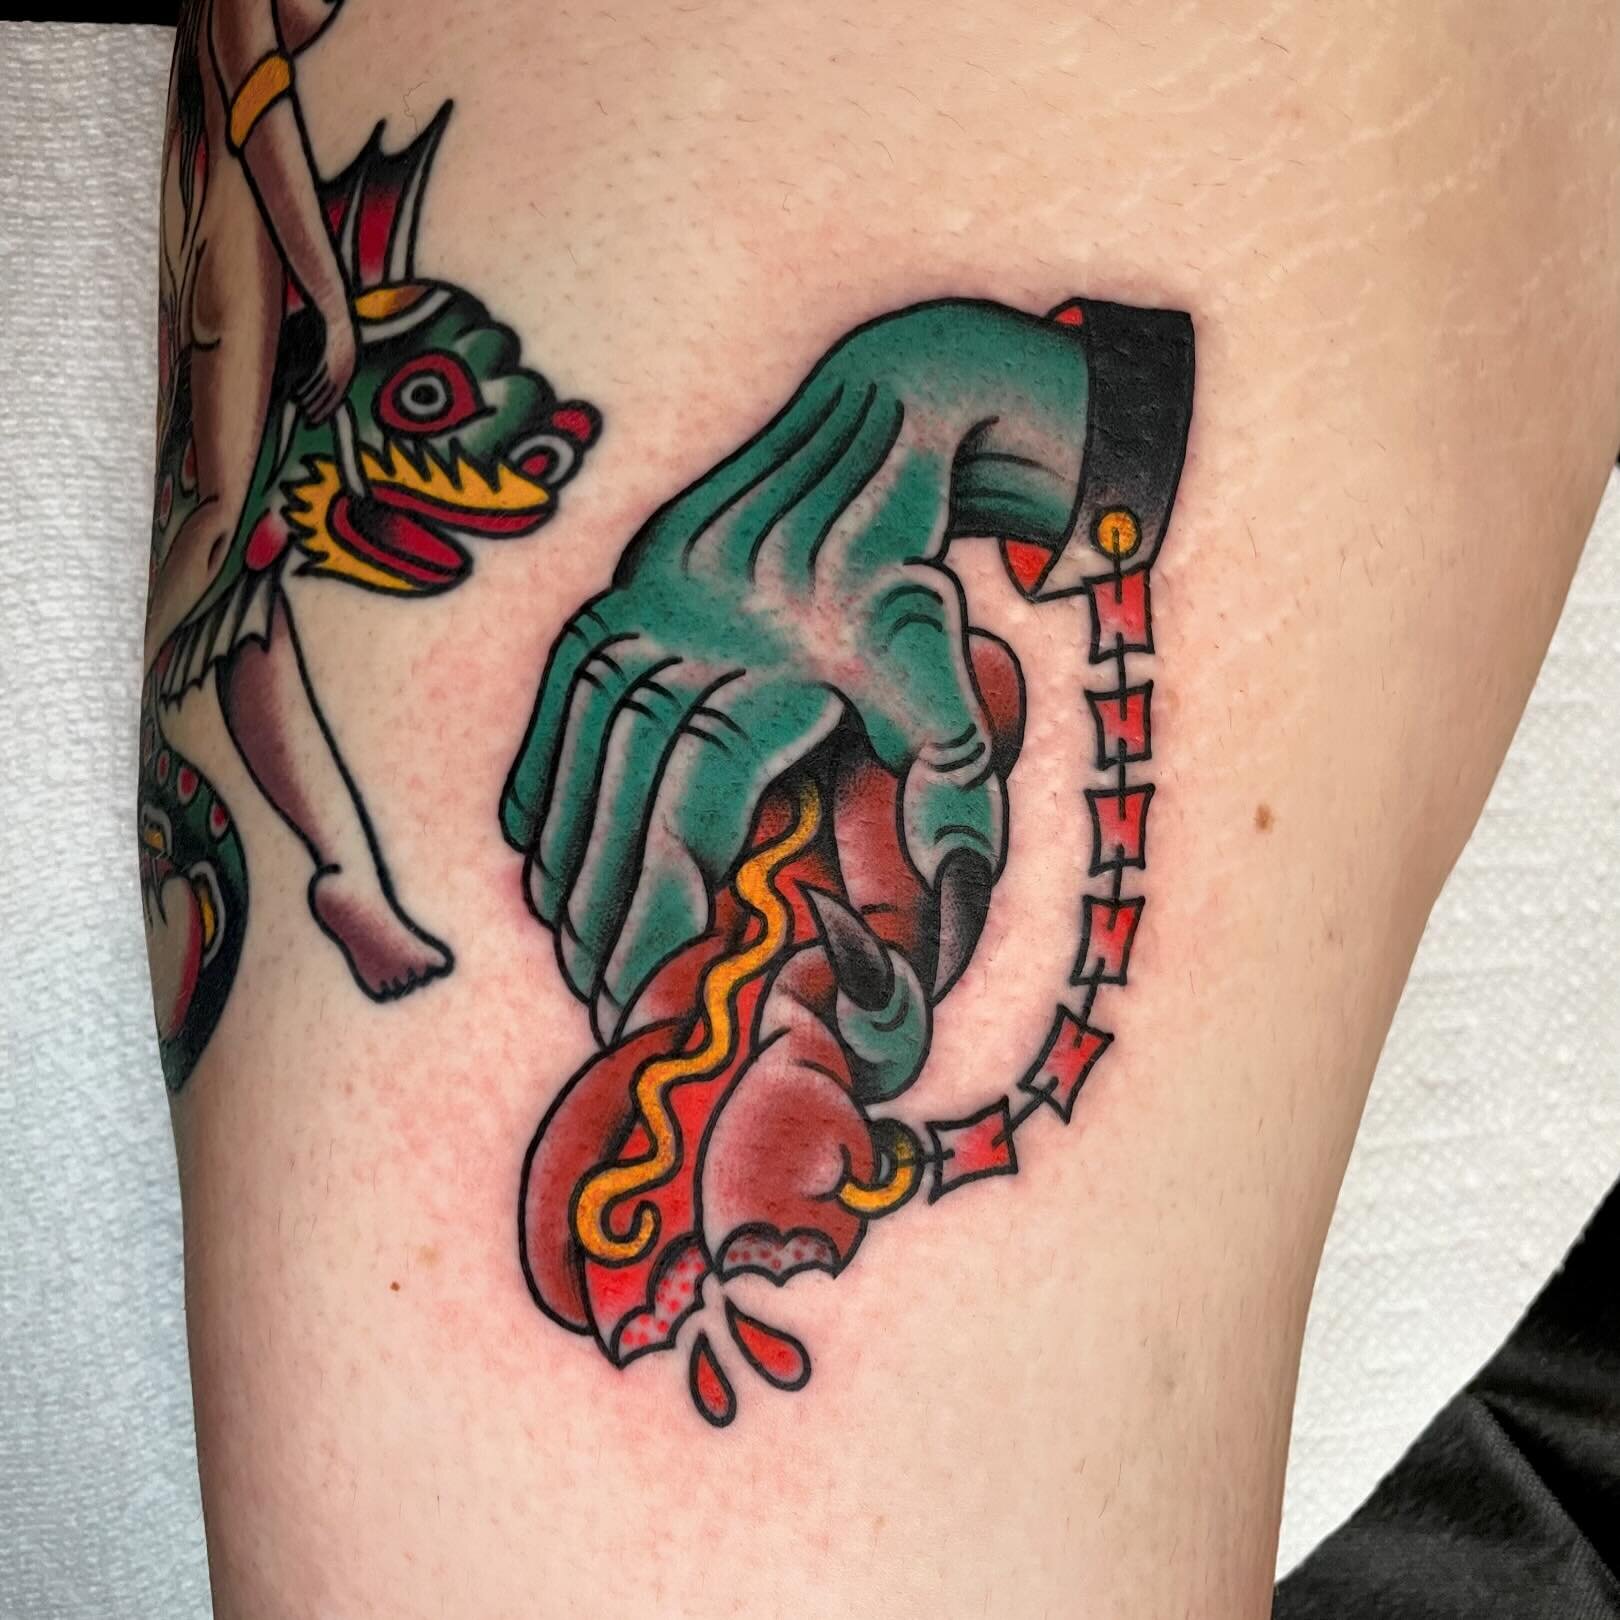 Let&rsquo;s get weird! Thanks Chelsea! 
👏🌭👏
.
.
.
#hotdogtattoo #prisonertattoo #prisonerofhotdogs #tattoo #tattoos #okc #oklahomacity #oklahoma #oklahomacitytattoo #oklahomacitytattooartist  #oklahomatattooartist #oklahomatattoo #americantraditio